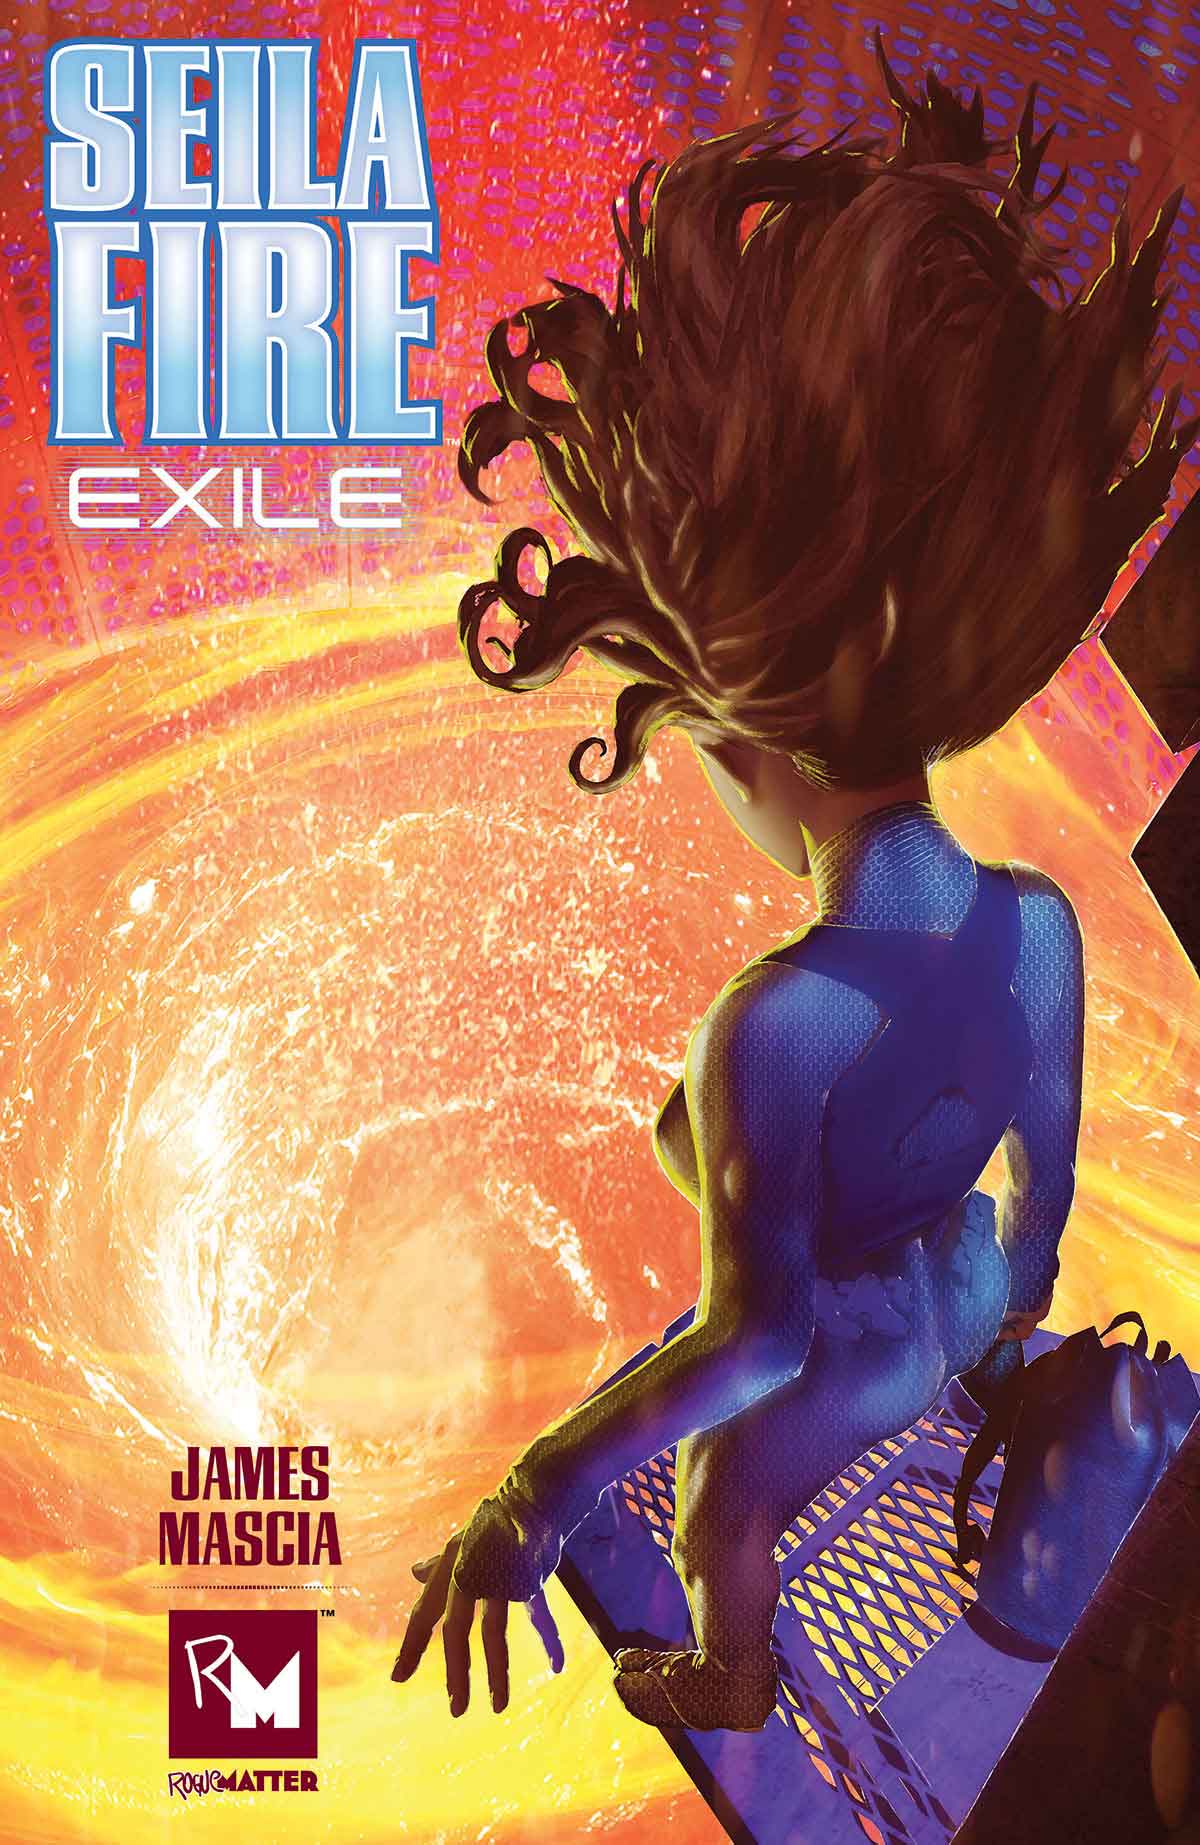 Cover of "Sella Fire Exile" book featuring a mystical landscape with a fiery phoenix soaring above a dark forest.